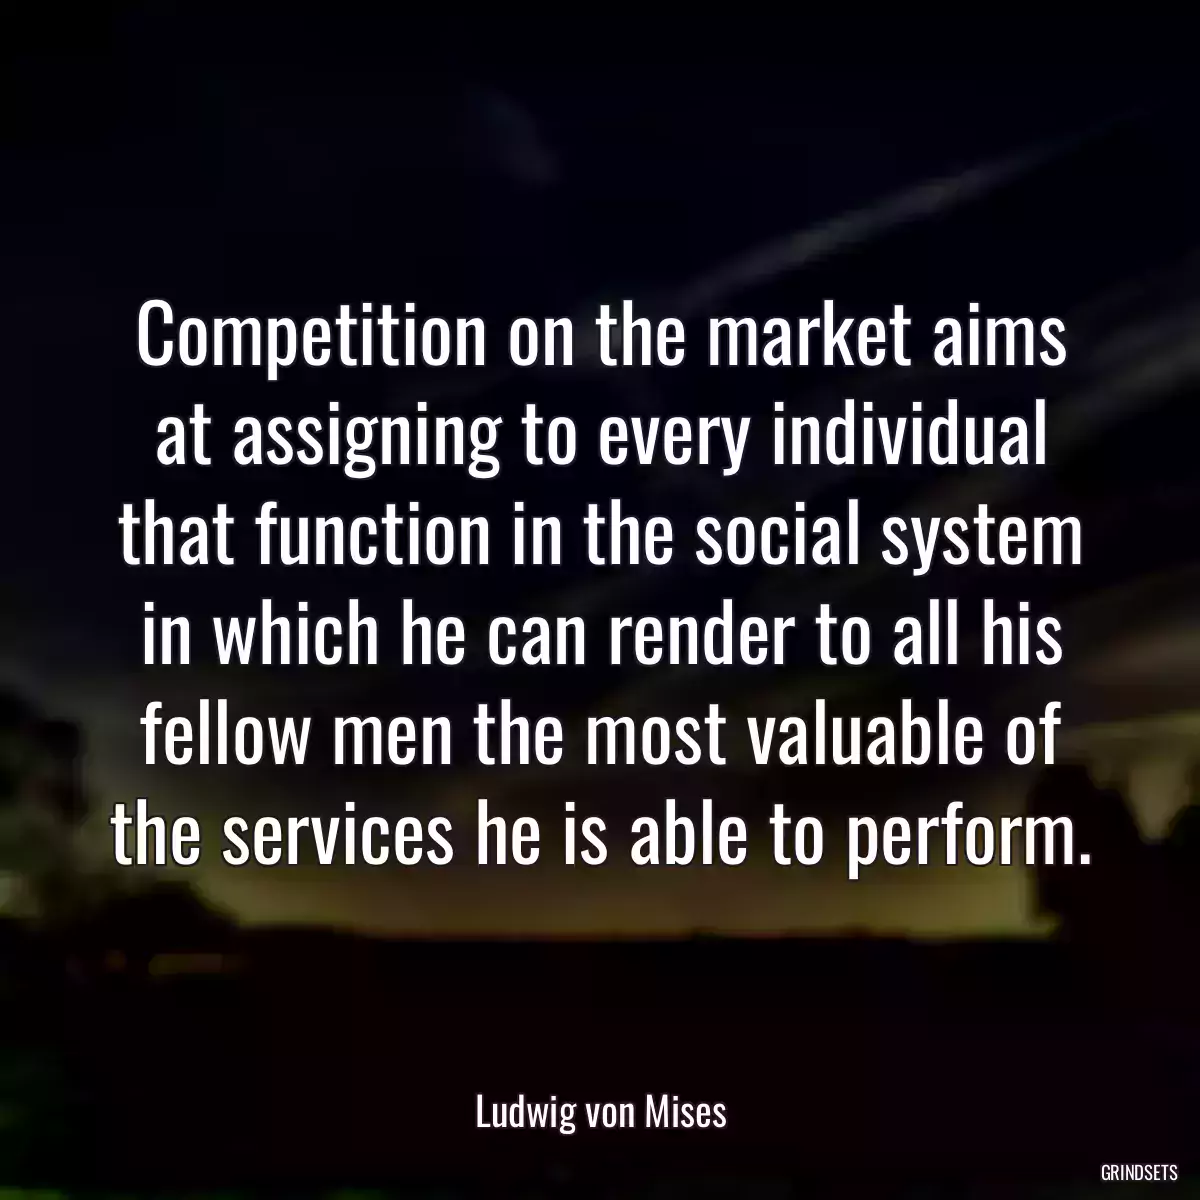 Competition on the market aims at assigning to every individual that function in the social system in which he can render to all his fellow men the most valuable of the services he is able to perform.